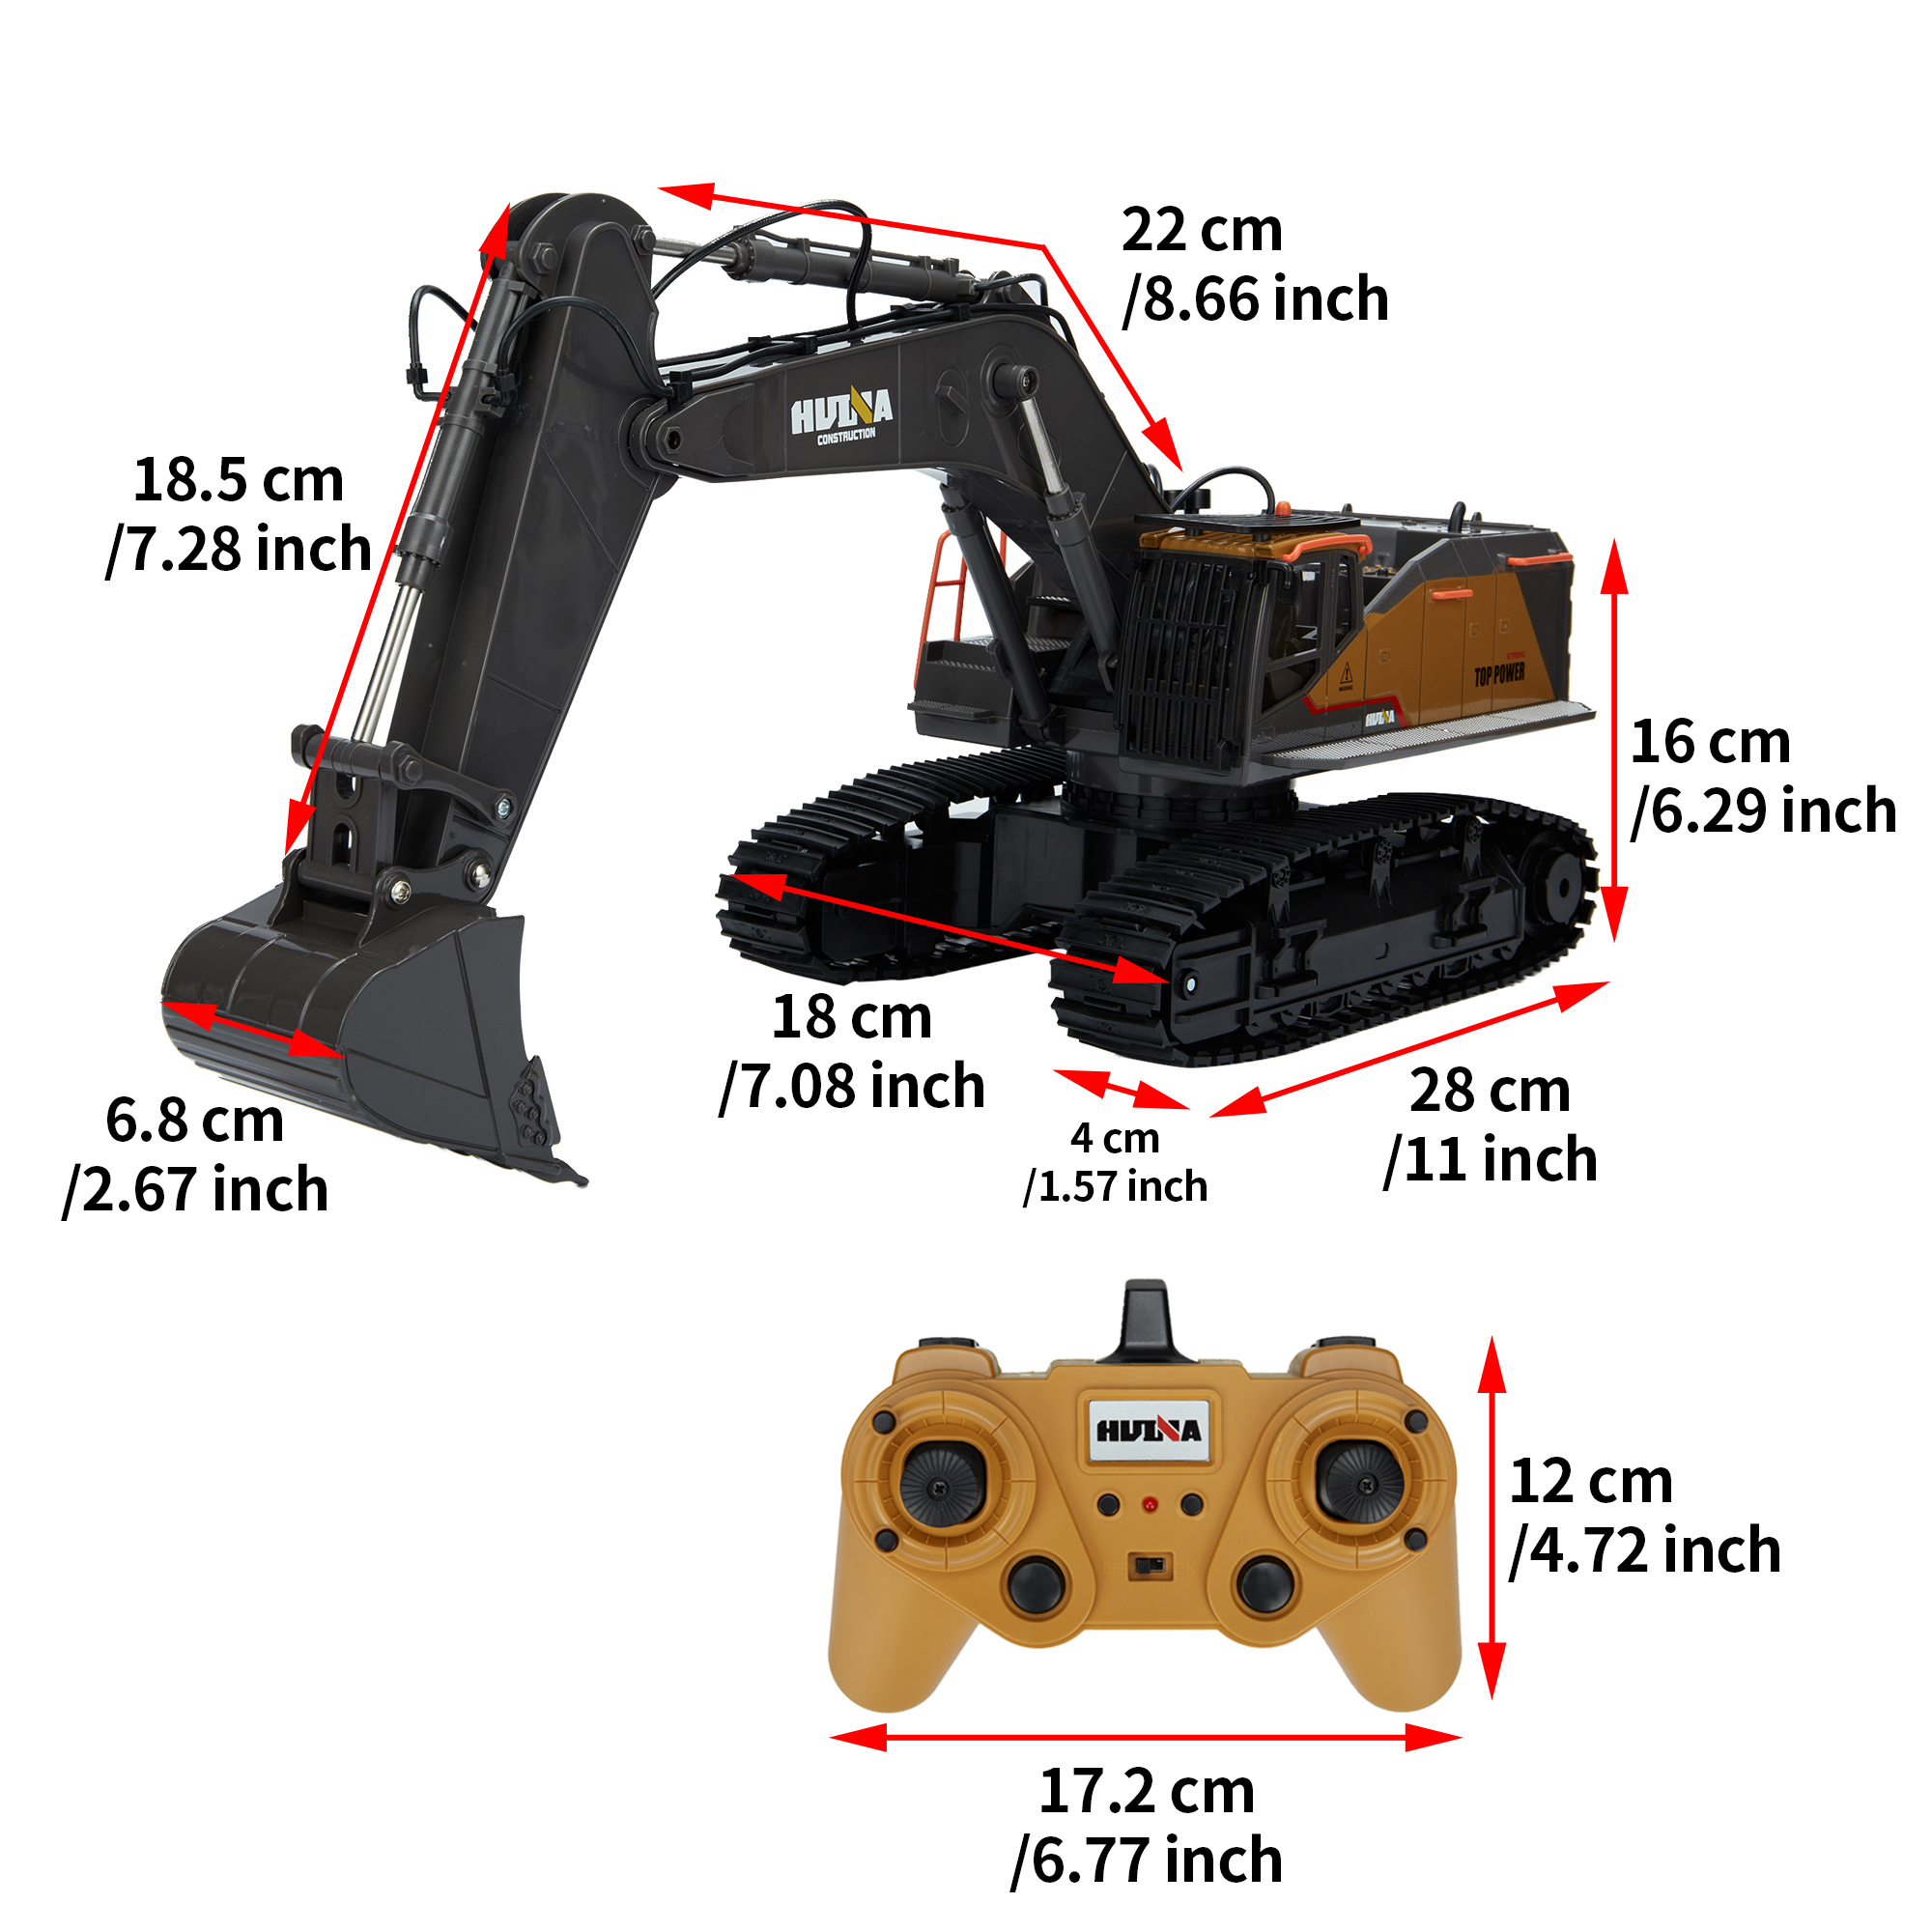 Excavator Toy Remote Control Excavator RC Truck Toy,22 Channel Rechargeable RC Truck Mini Construction excavator1/24 Scale RC Excavator Construction Vehicles Gifts - image 3 of 8